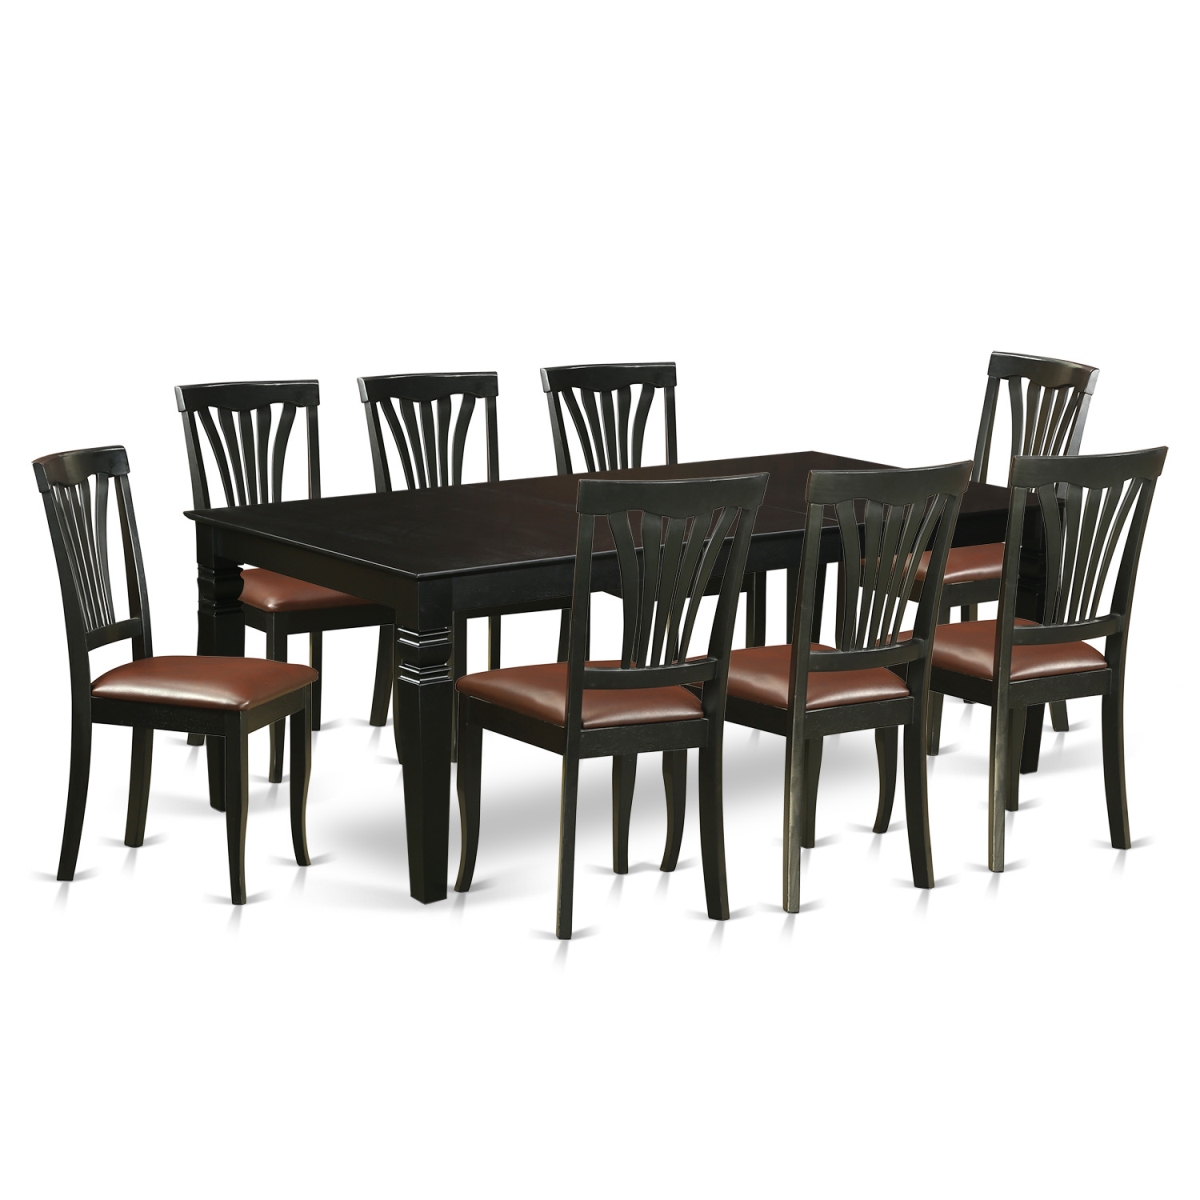 Dinette Set With 1 Logan Kitchen Table & Eight Faux Leather Upholstery Chairs, Luxurious Black - 9 Piece